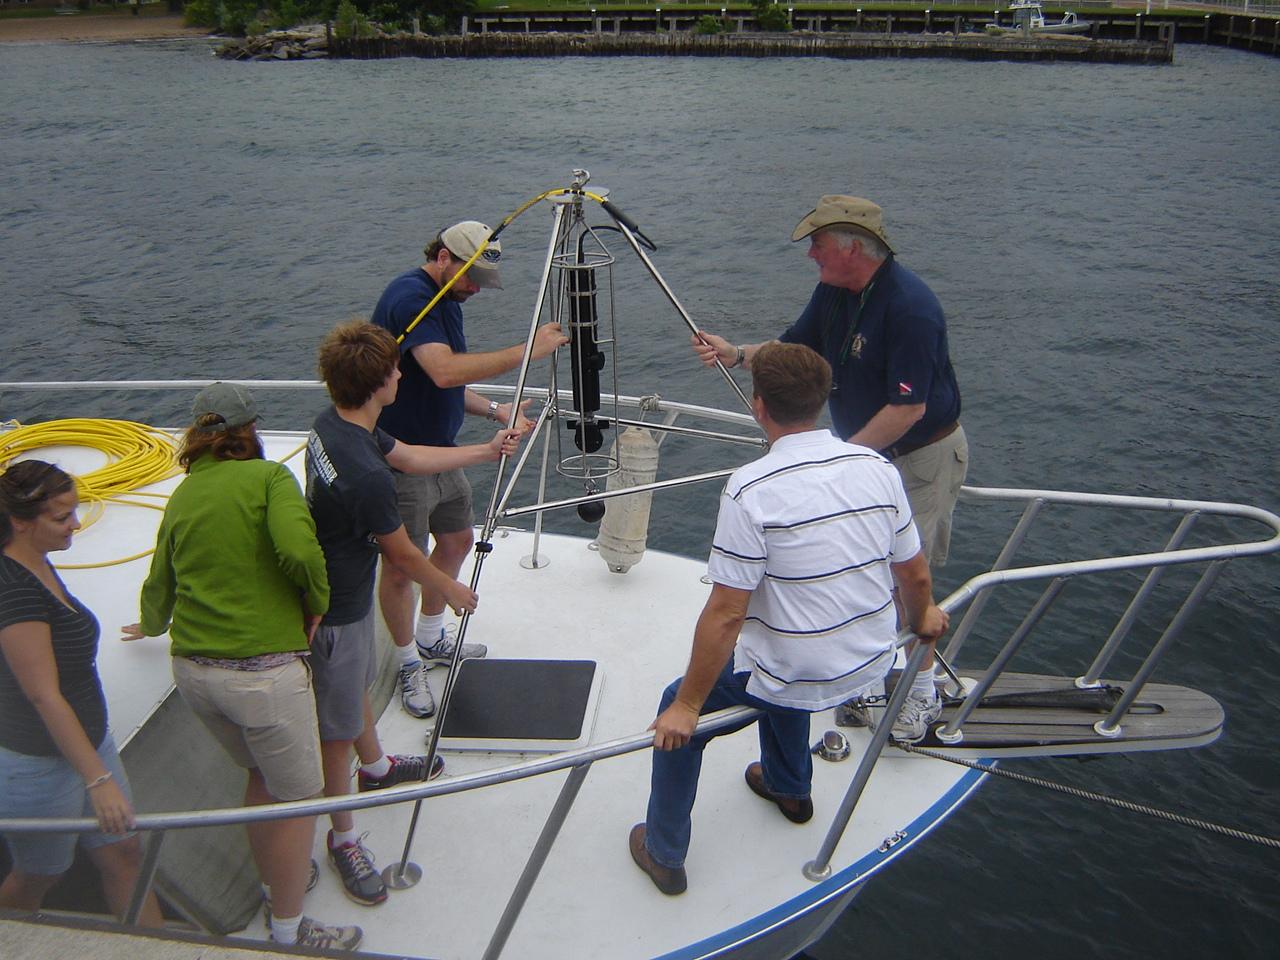 Assembling a Sector Scan Sonar during a NAS Part III course